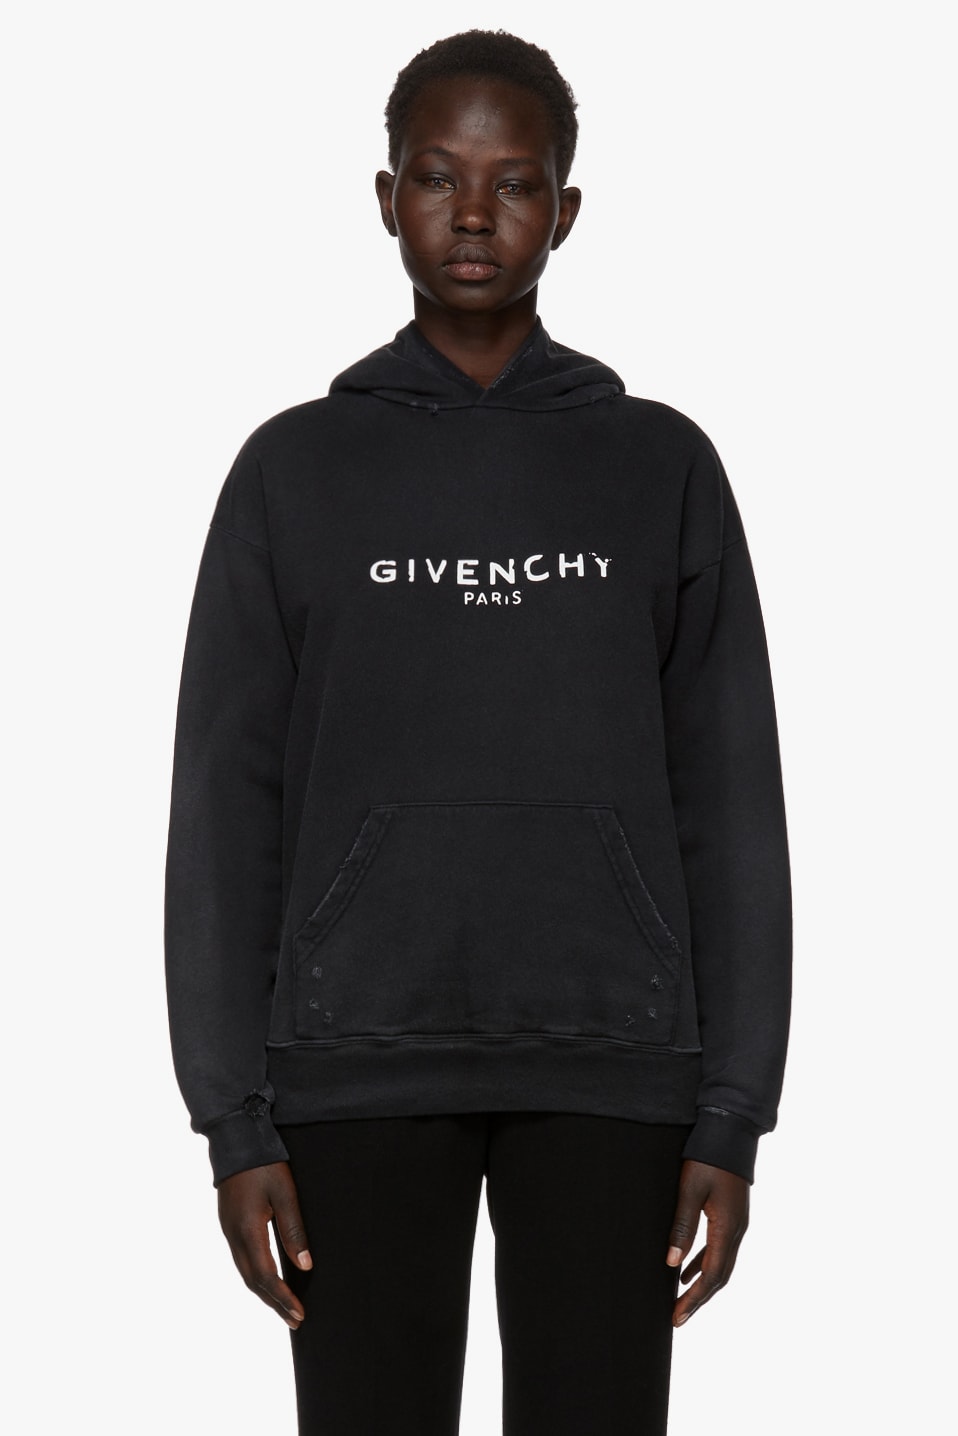 Givenchy's Black Distressed Logo Hoodie